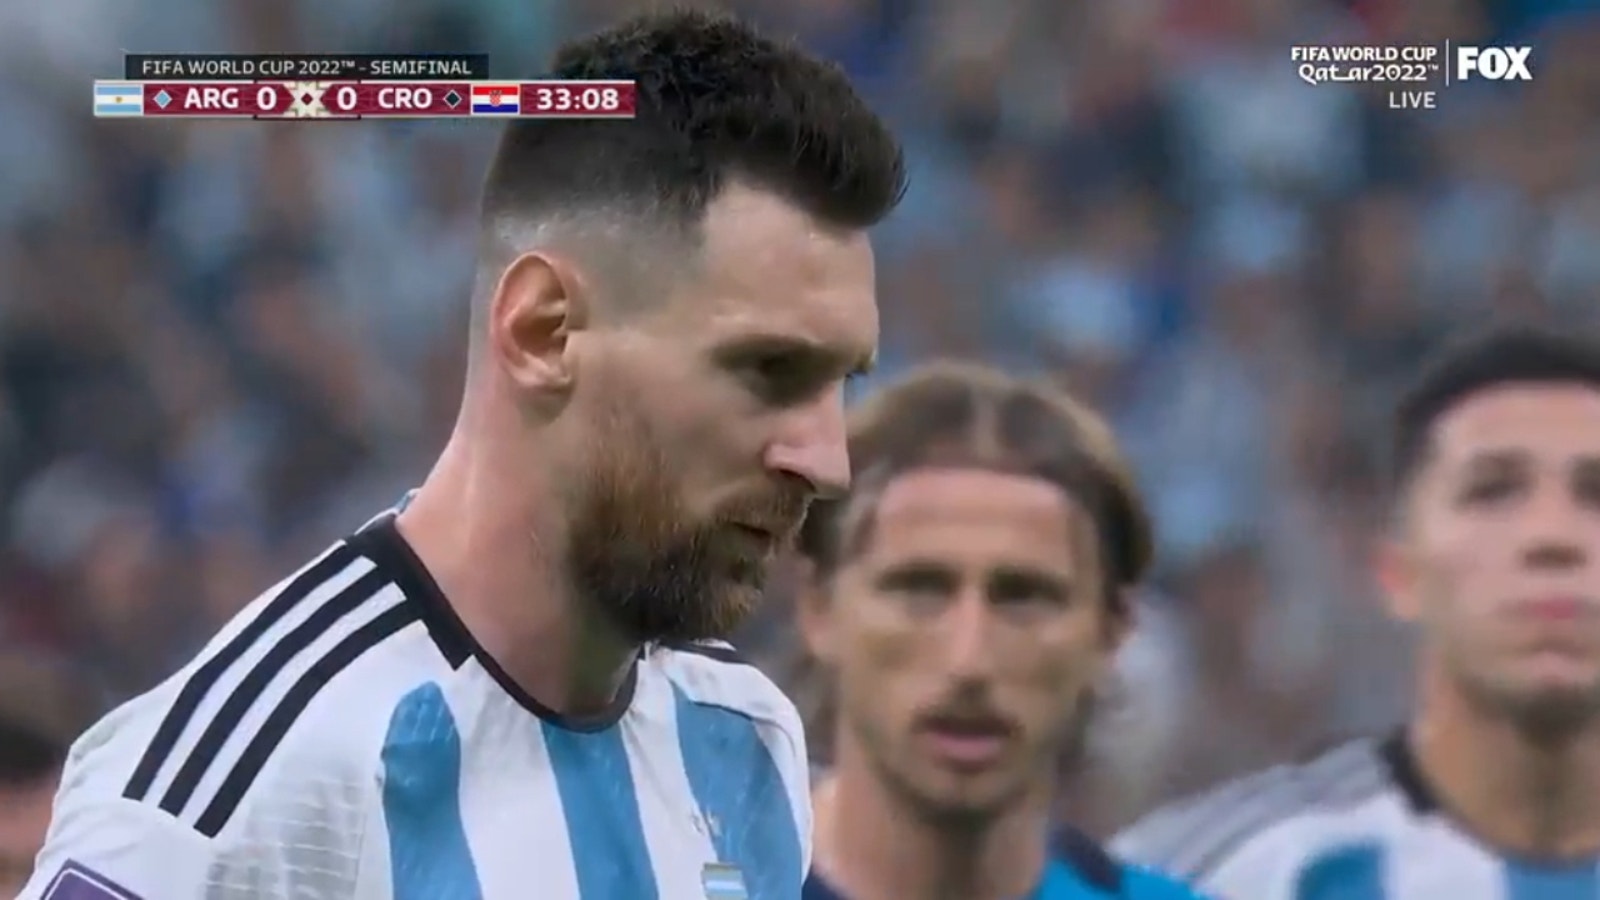 Lionel Messi scores off a penalty kick to give Argentina the lead over Croatia 